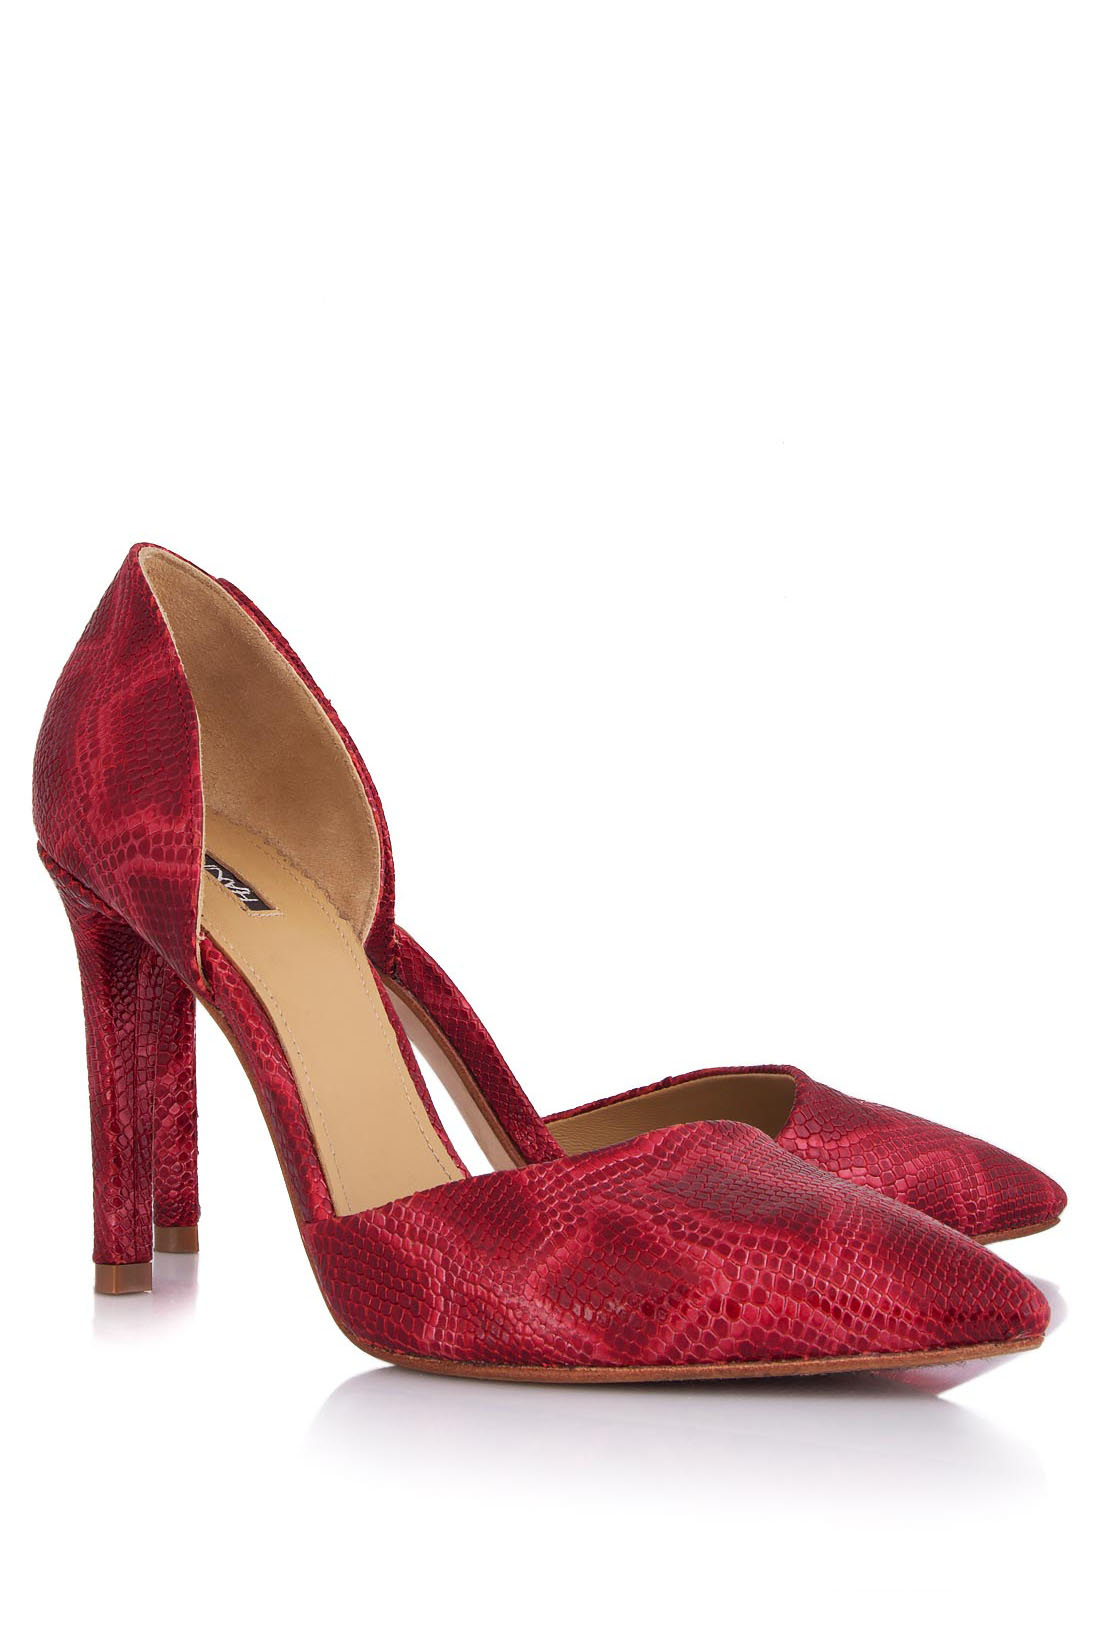 'Forever Marlyne' textured-leather pumps Hannami image 1